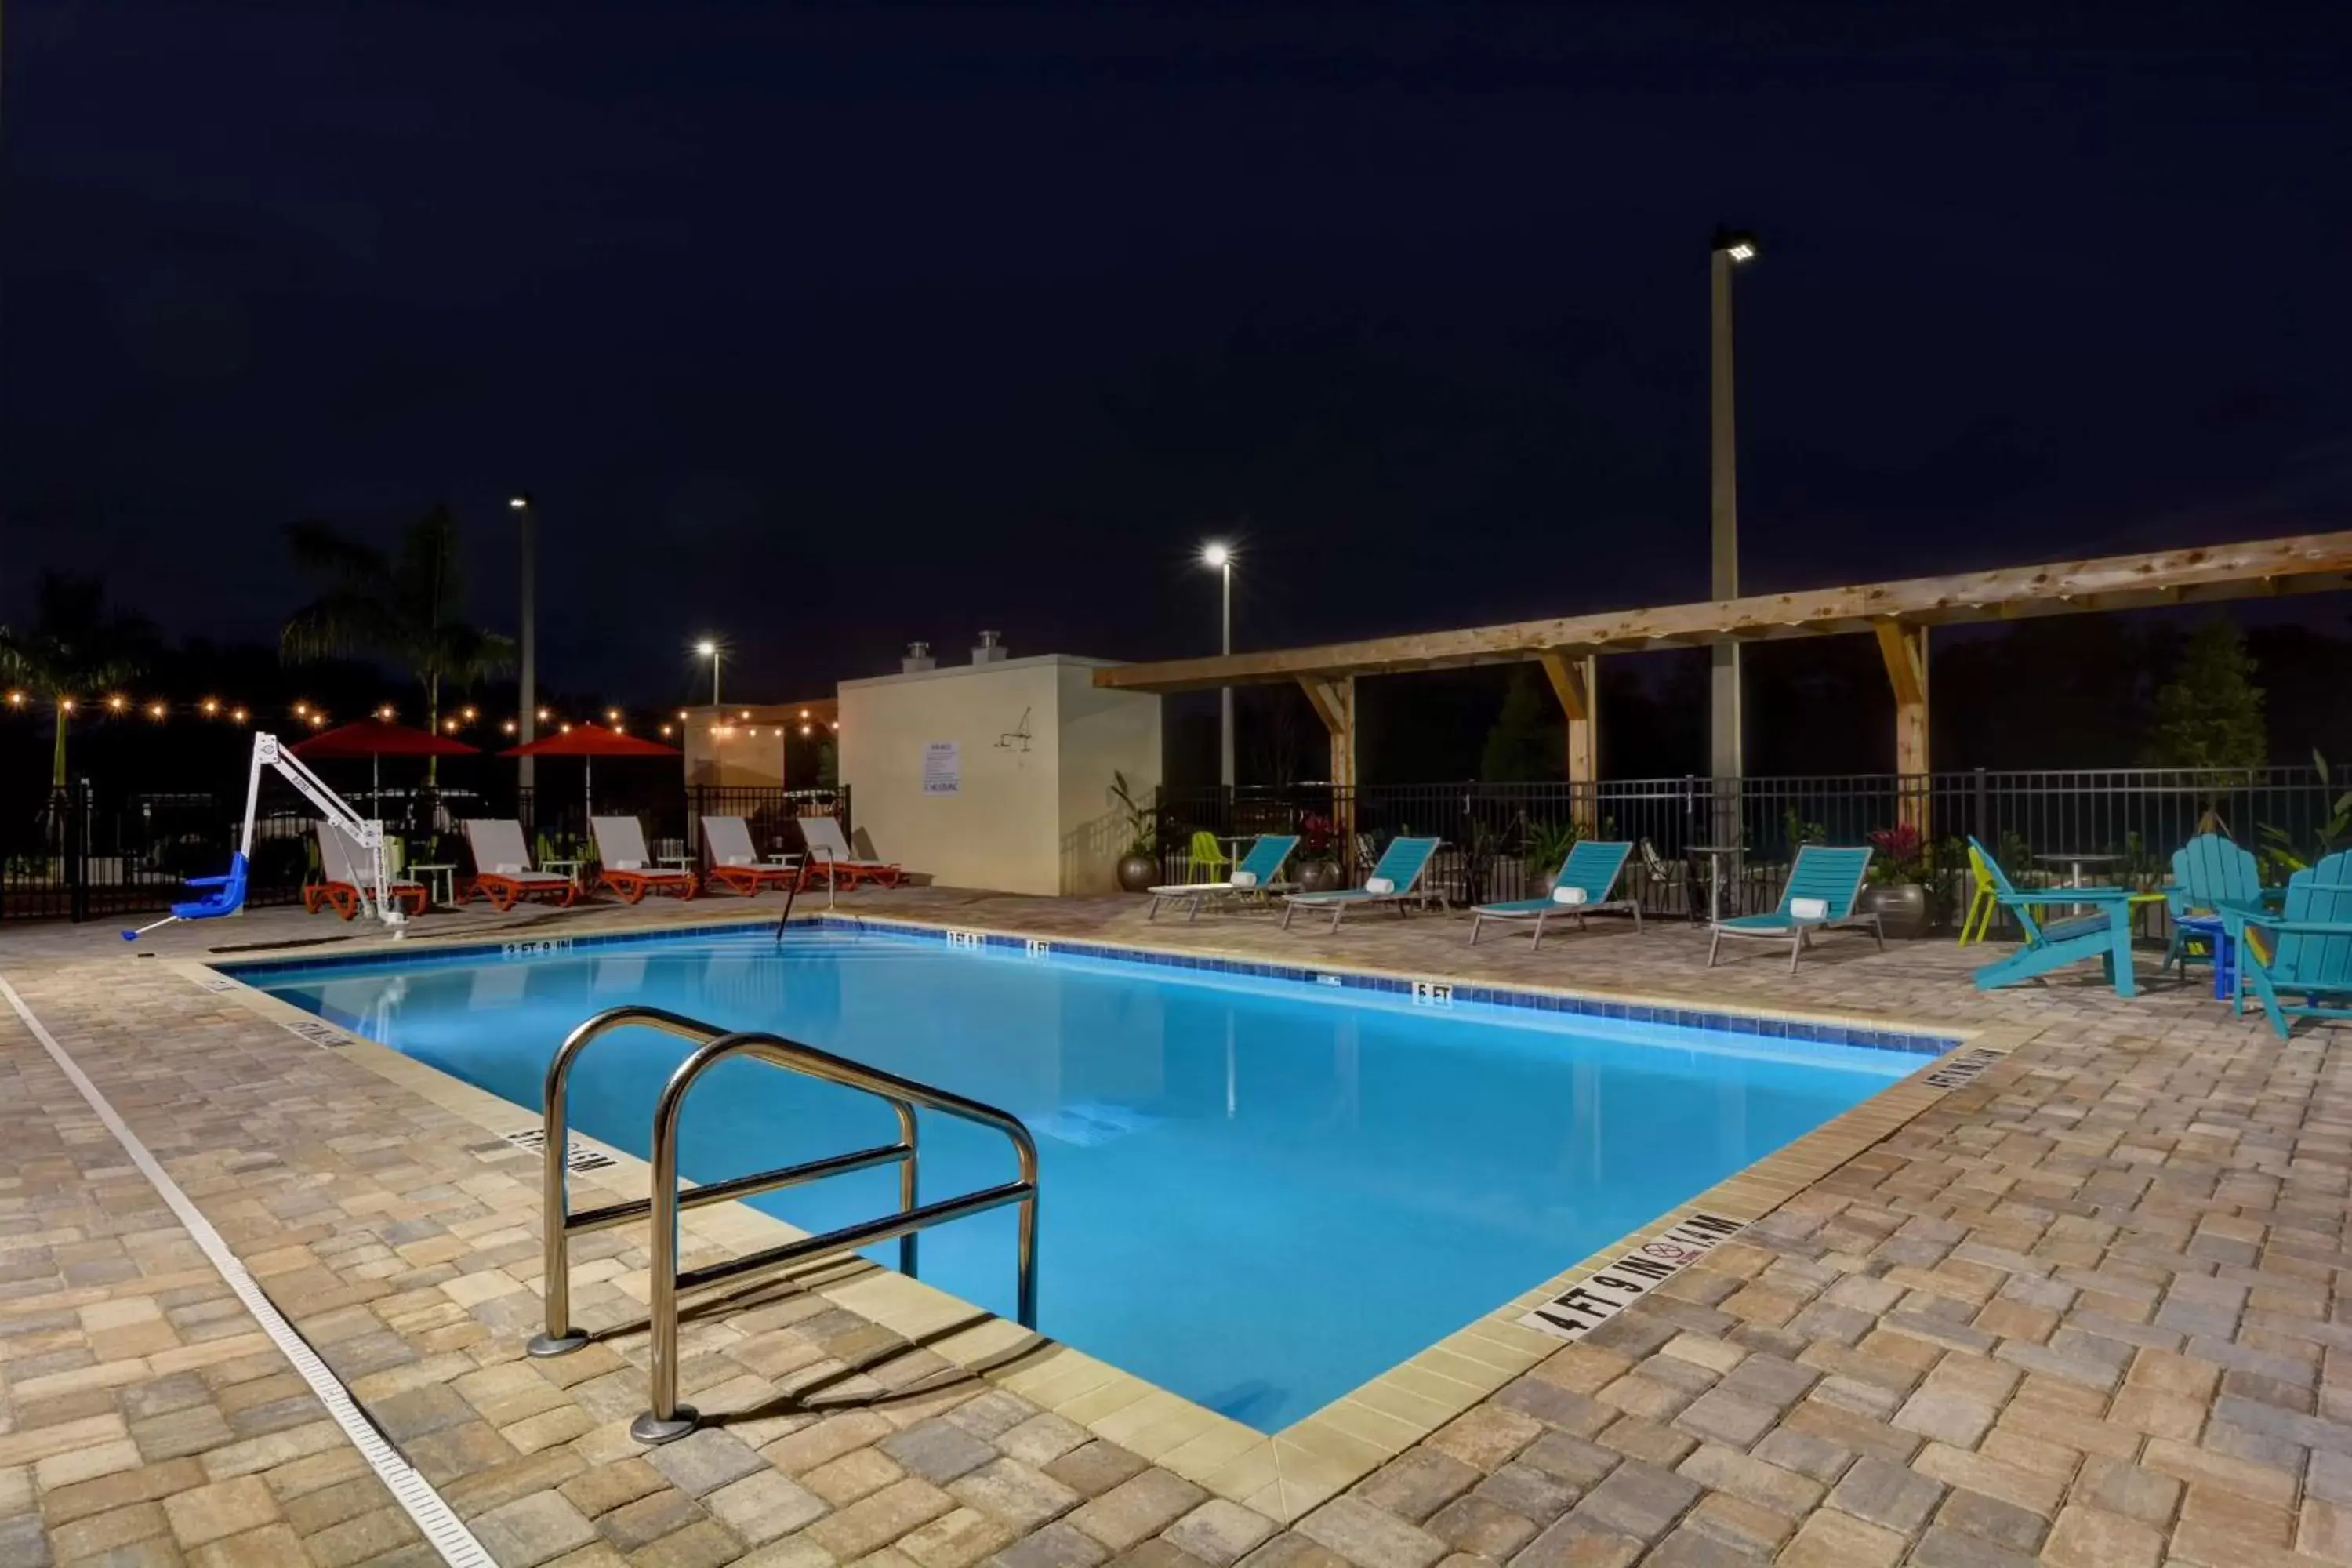 Property building, Swimming Pool in Home2 Suites by Hilton, Sarasota I-75 Bee Ridge, Fl